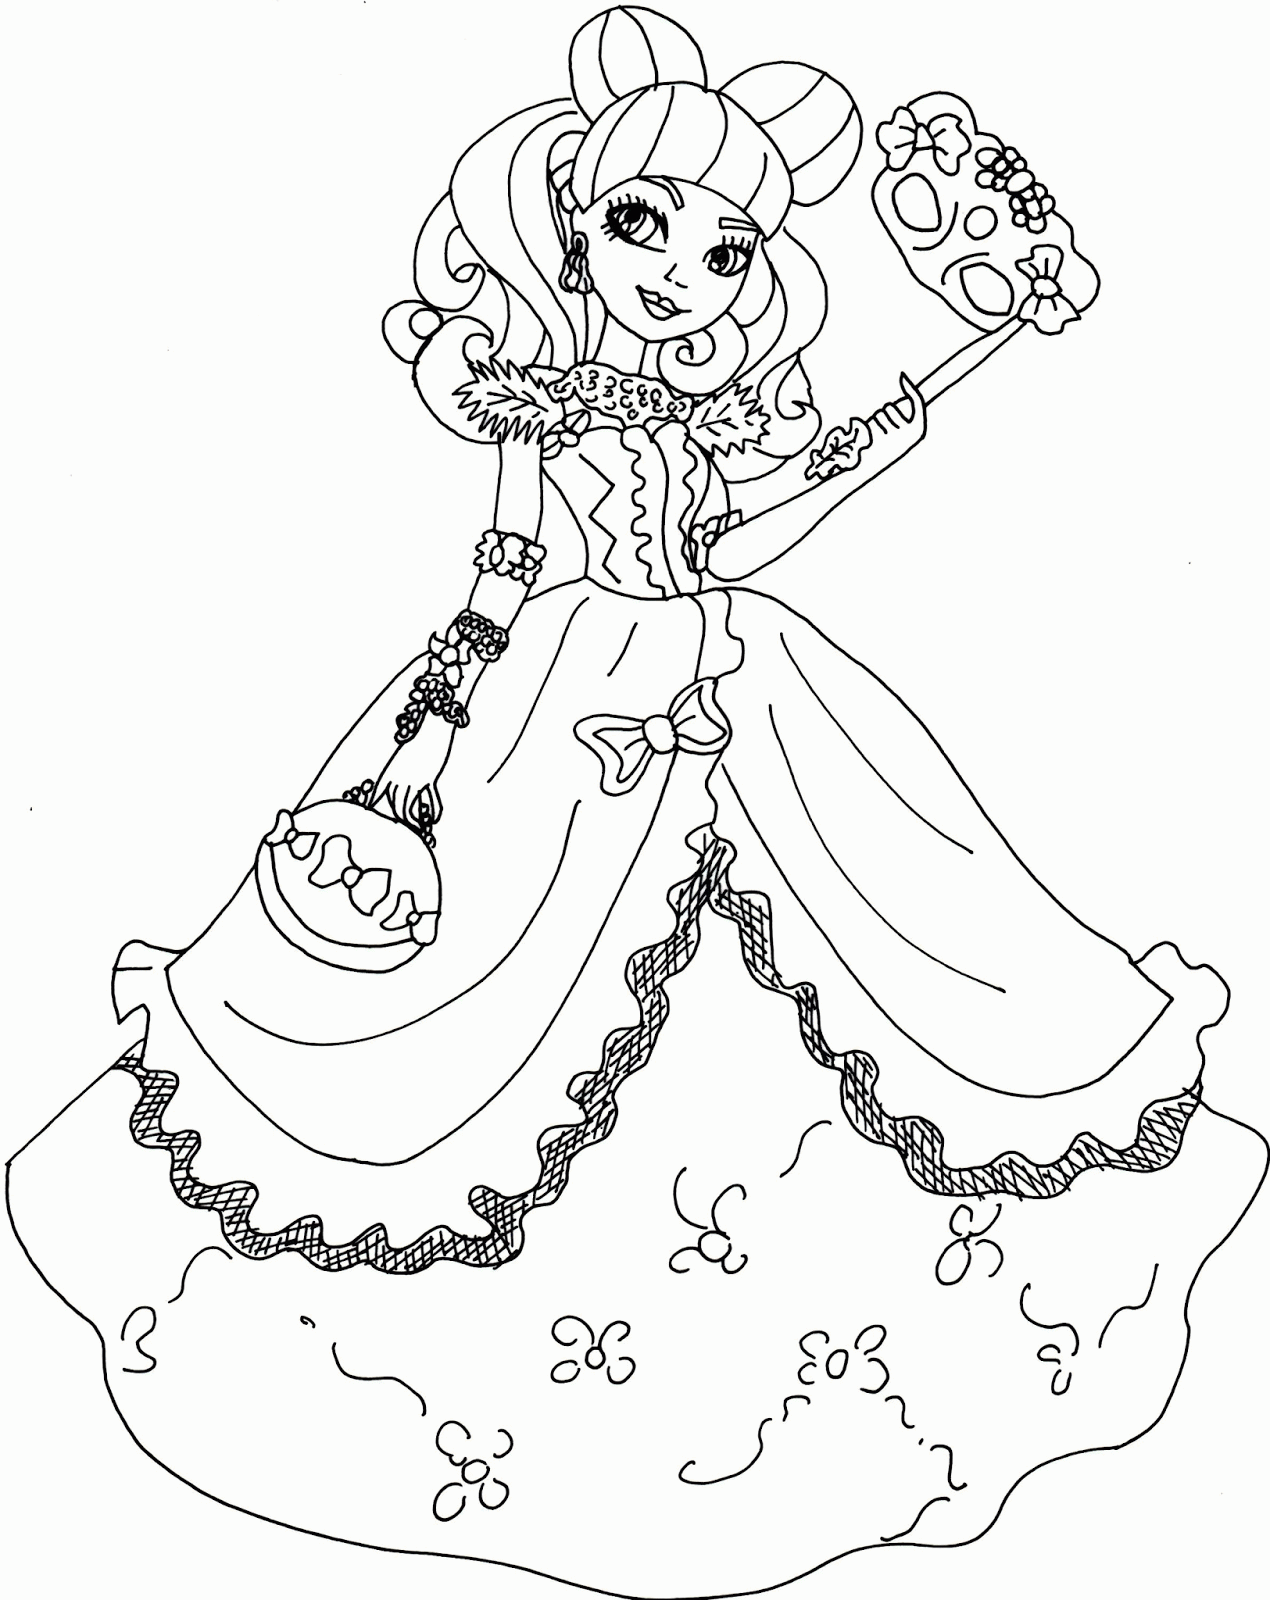 Free Printable Ever After High Coloring Pages: Blondie Lockes ...